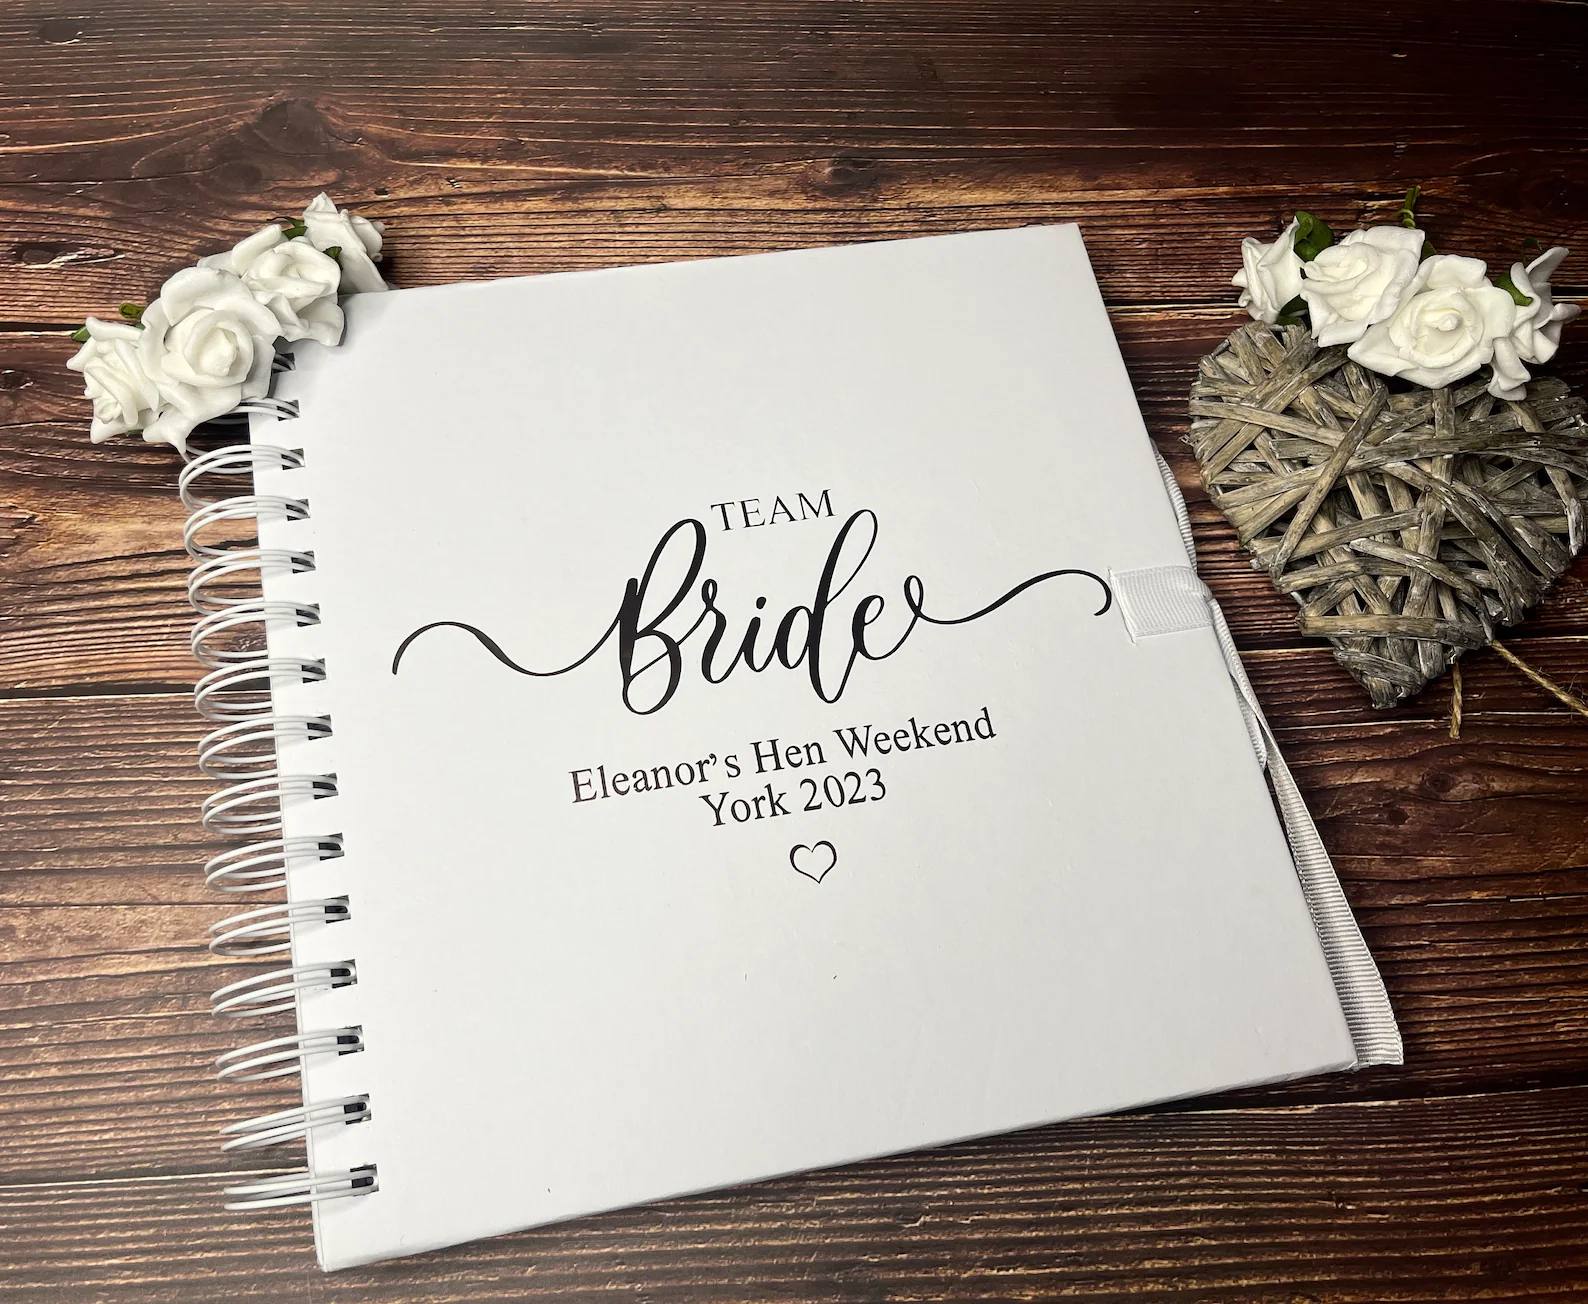 Personalised Photo Albums or Magnets - Bridesmaid Gift Idea